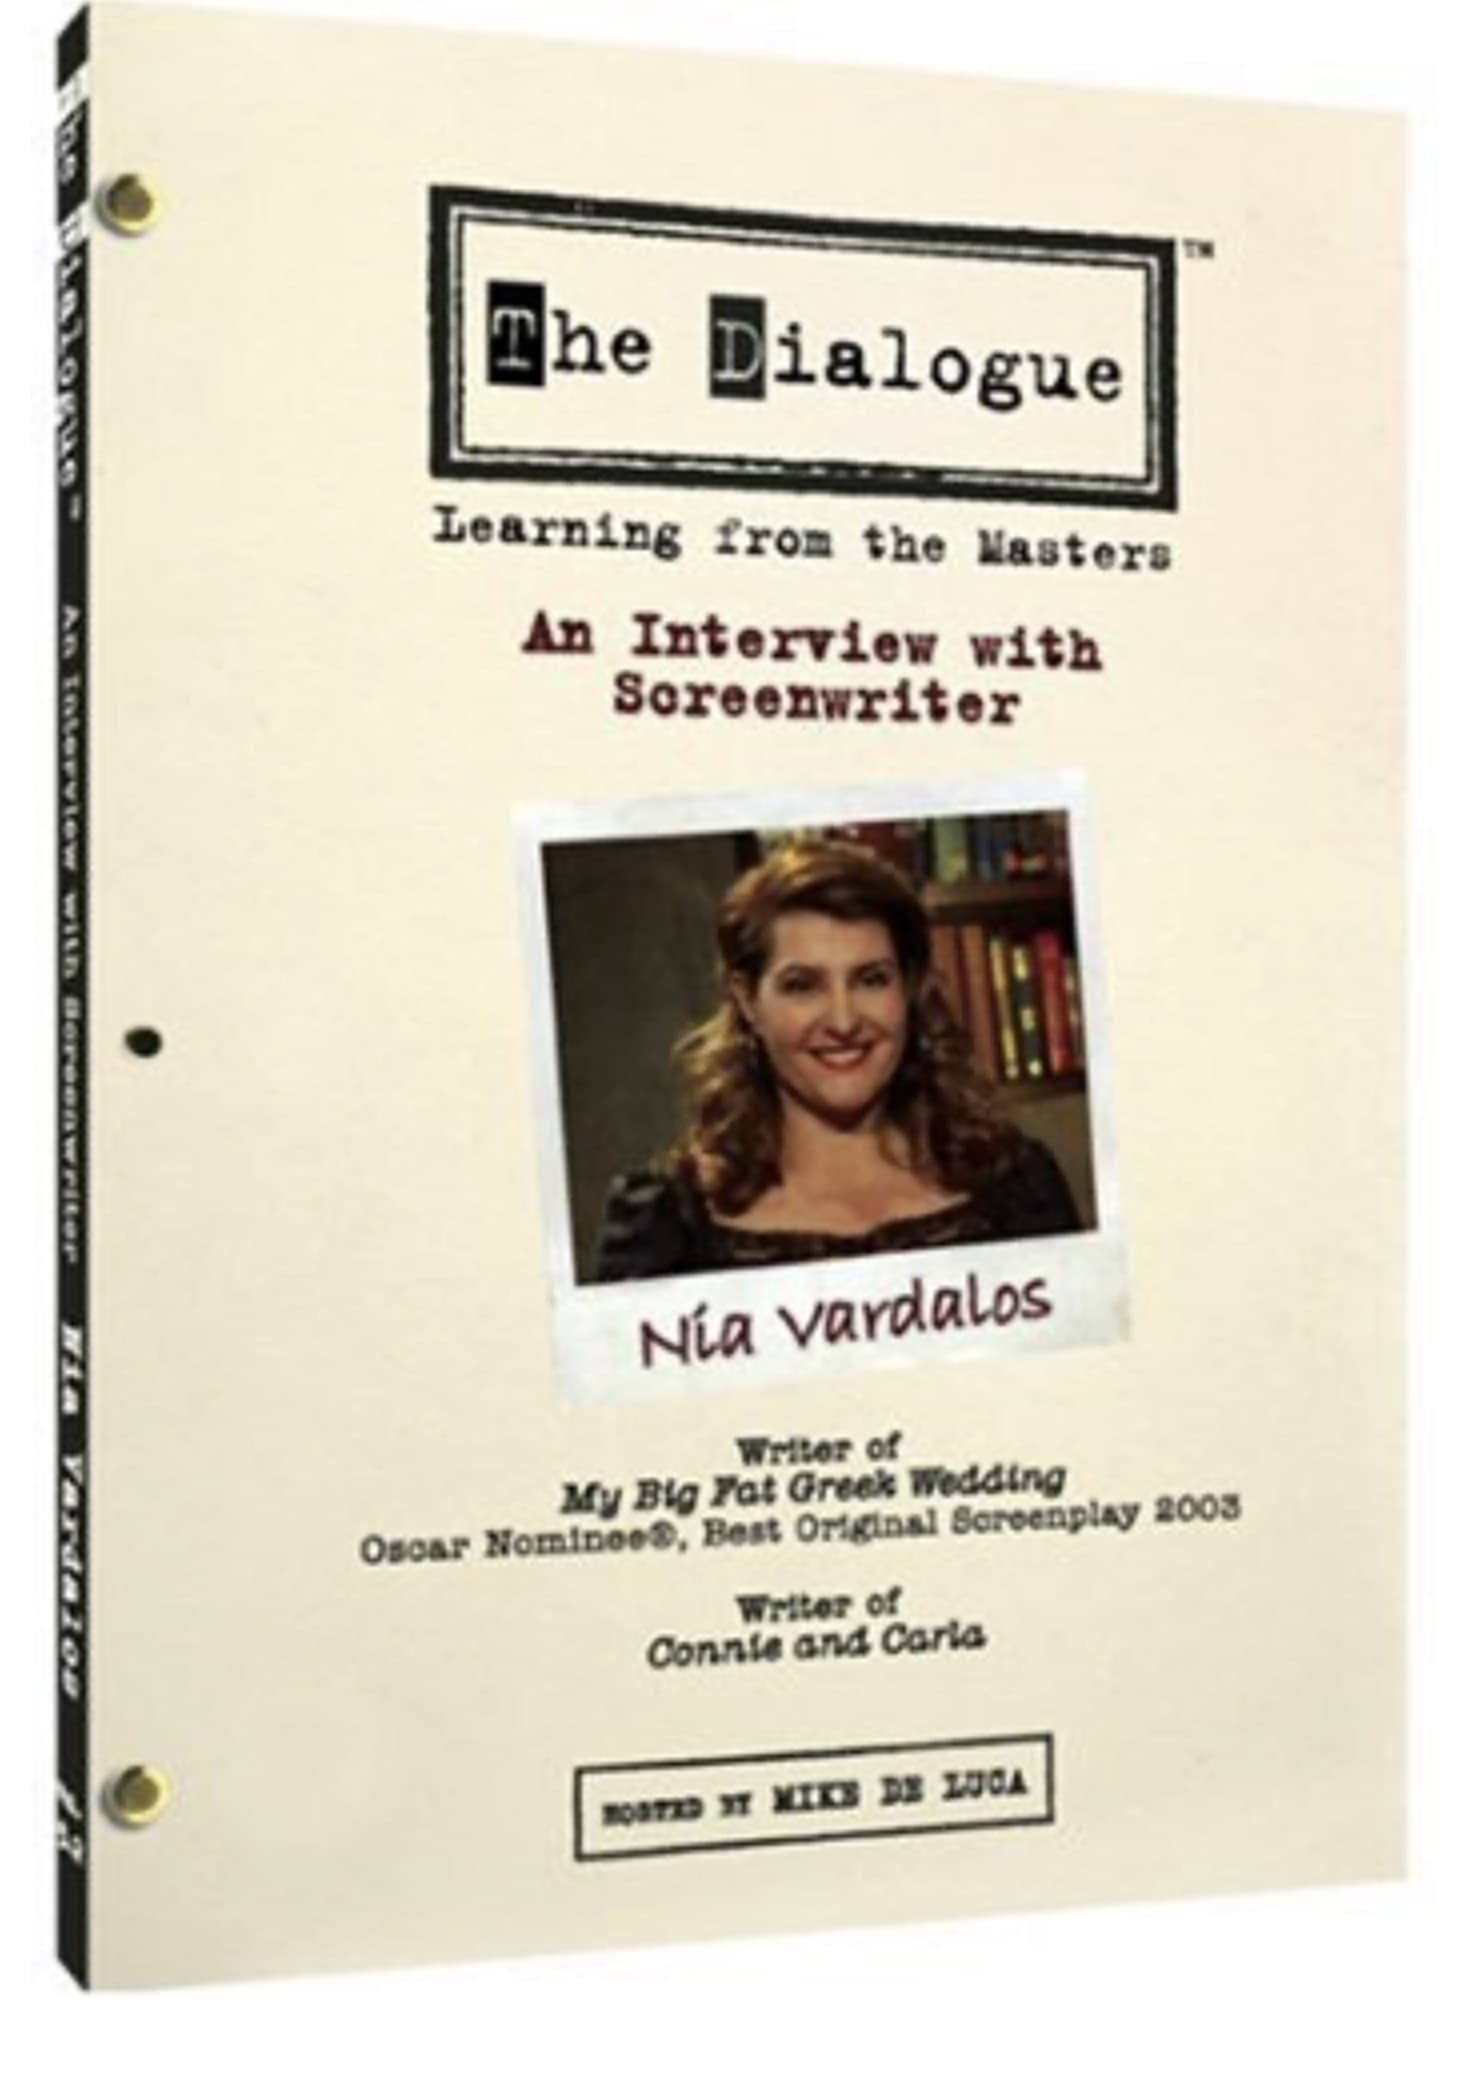 The Dialogue: An Interview with Screenwriter Nia Vardalos (2007)